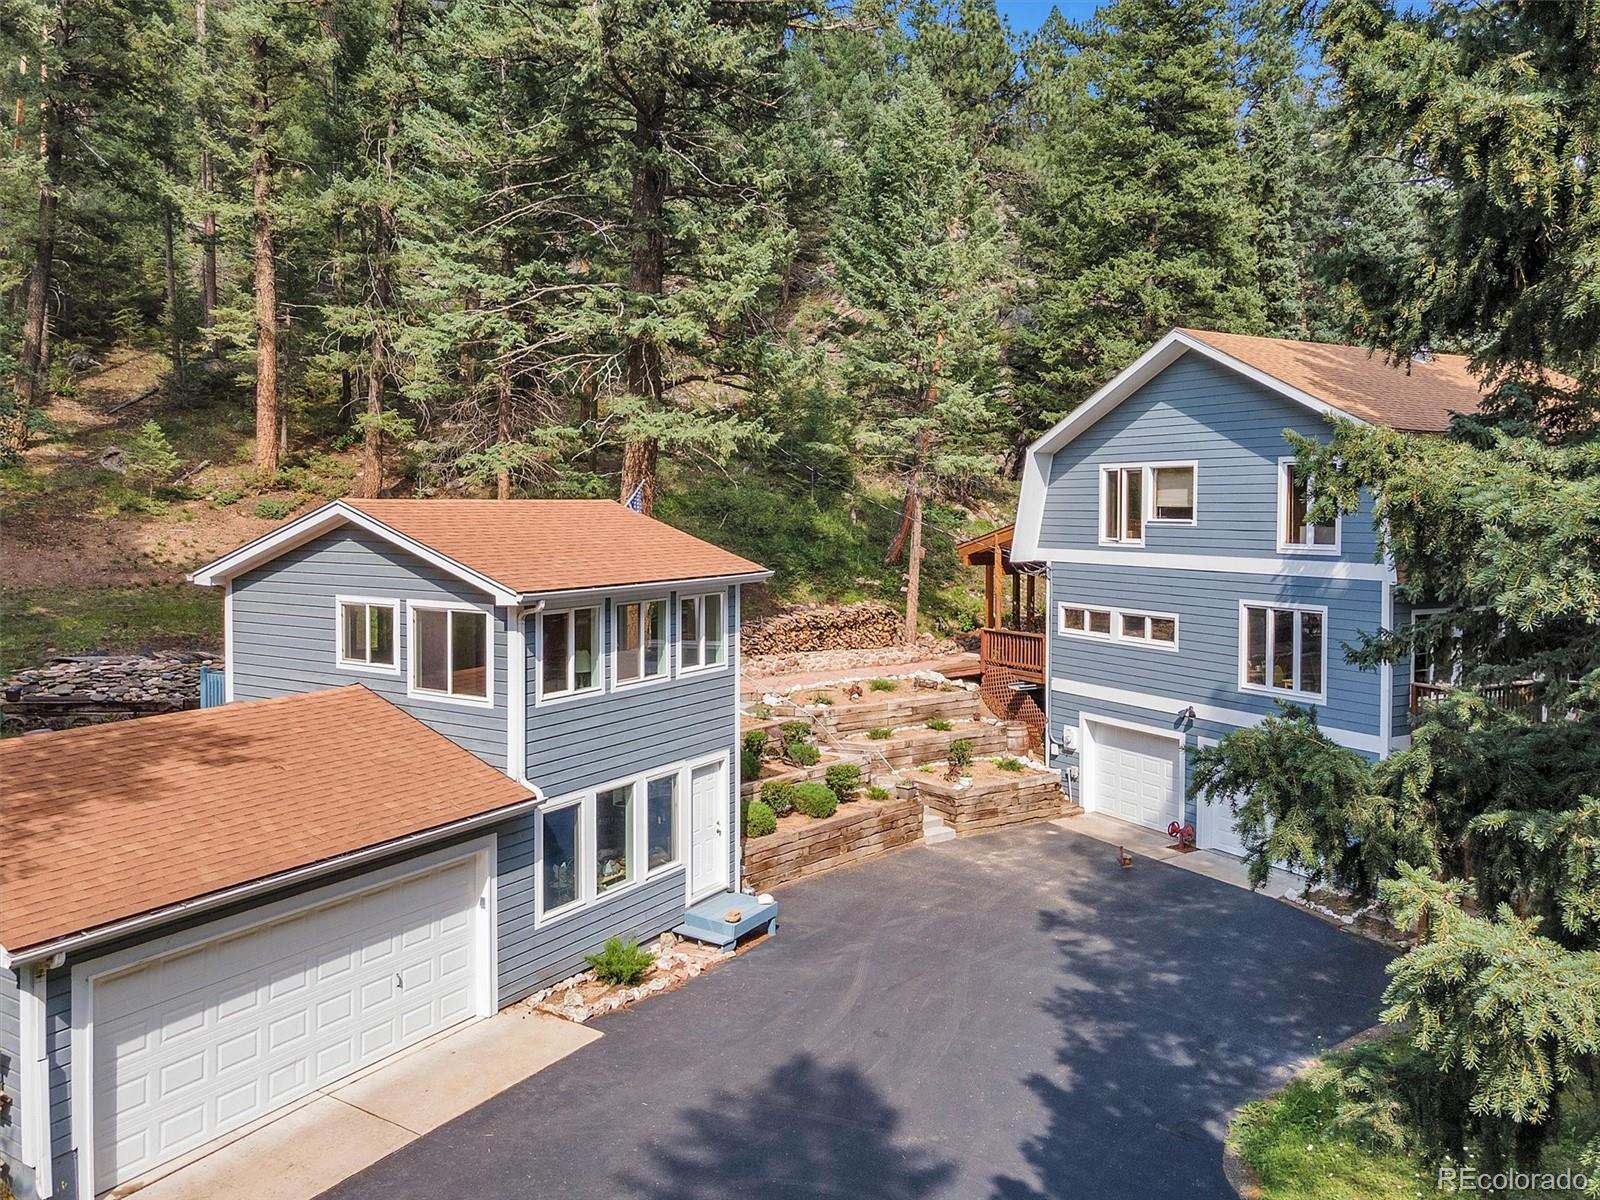 7270 Brook Forest Drive, Evergreen, CO 80439 - #: 3620575